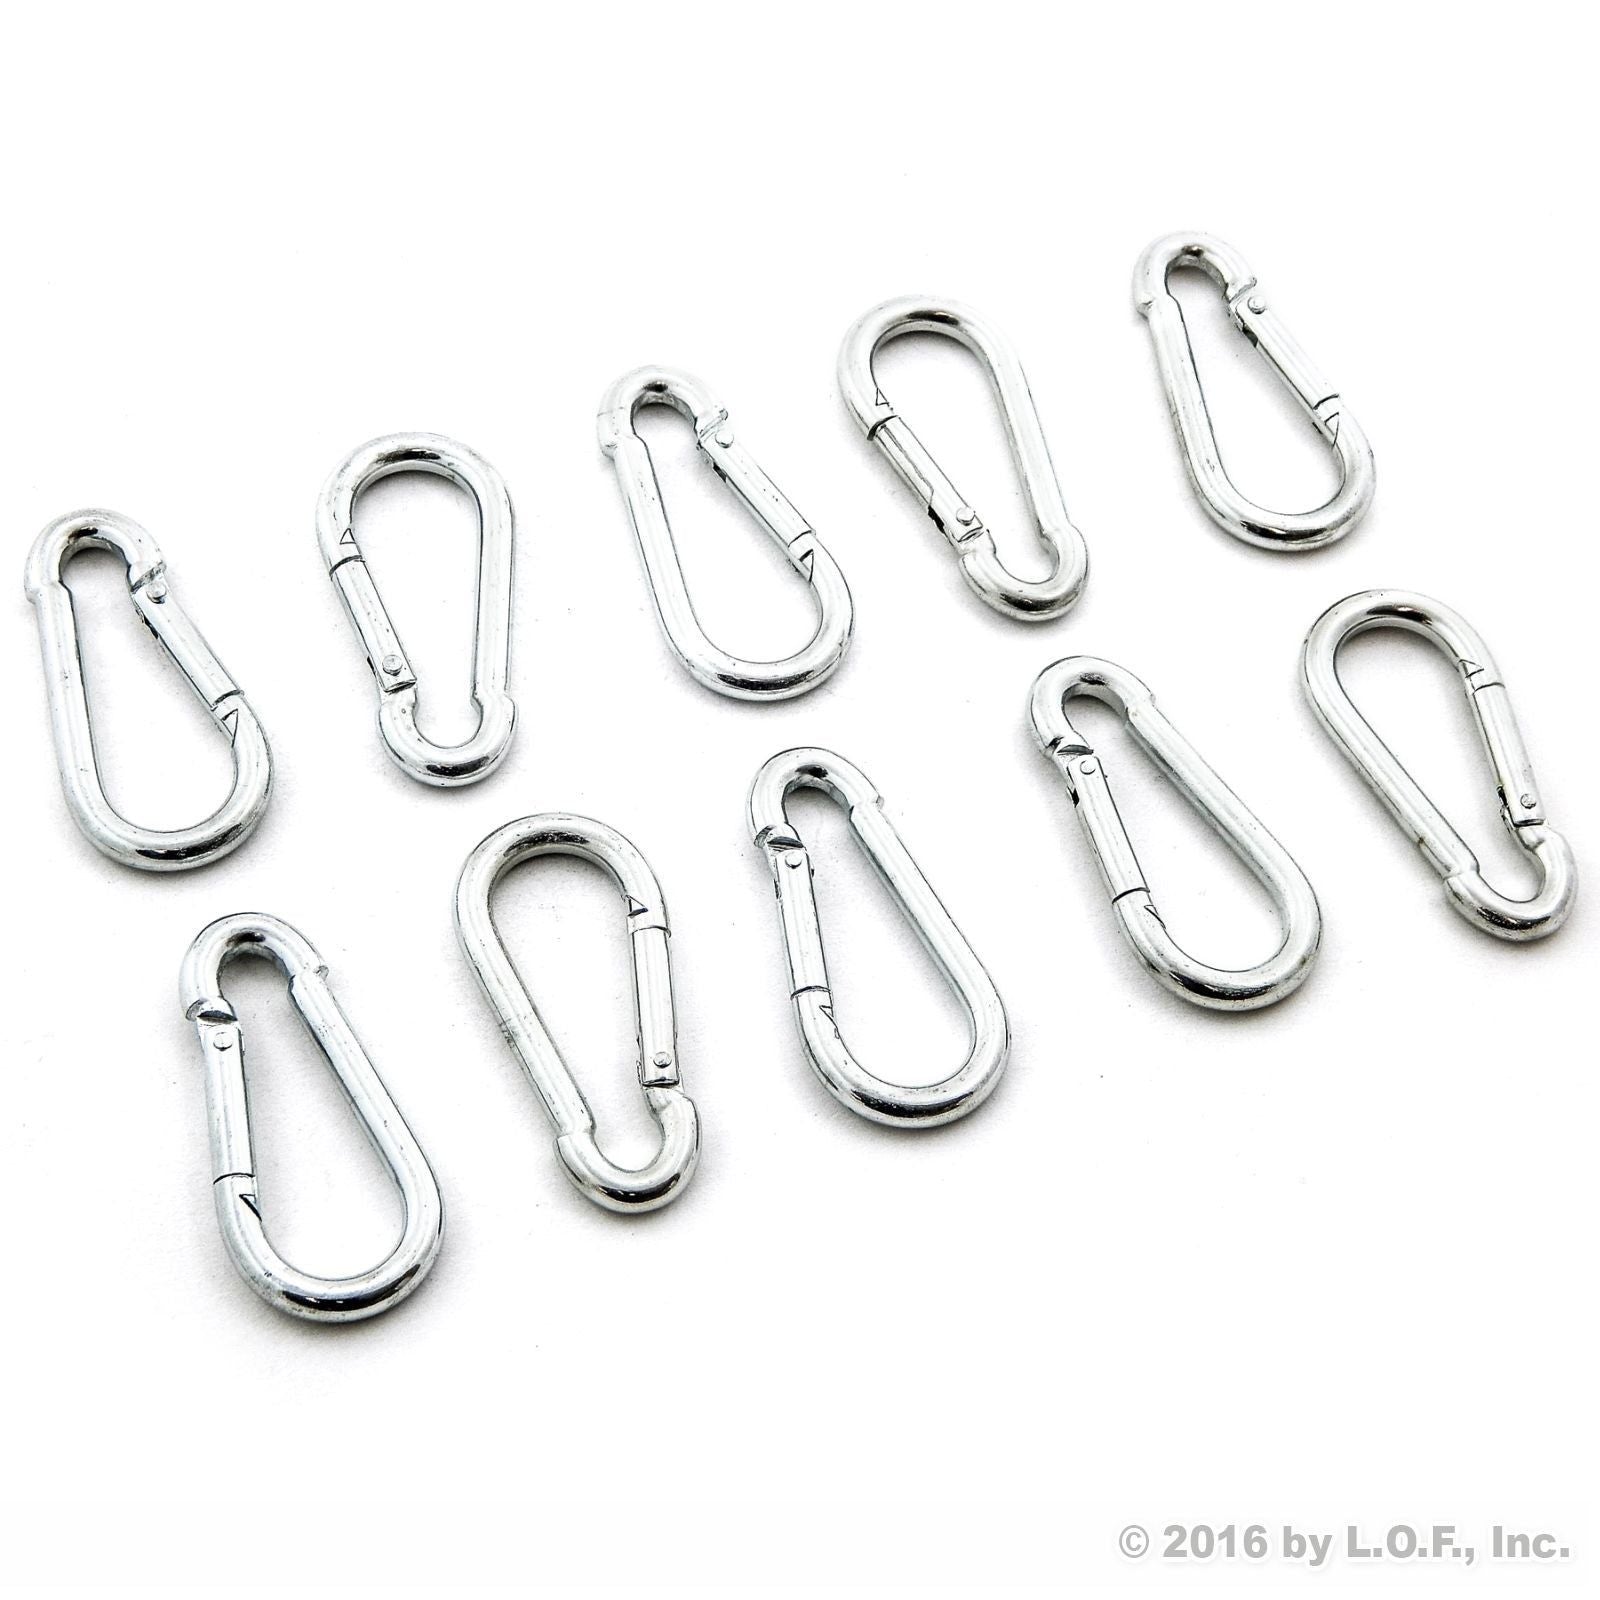 Red Hound Auto 10 Steel Spring Snap Quick Link Carabiner Hook Clips 2-3/8 Inches